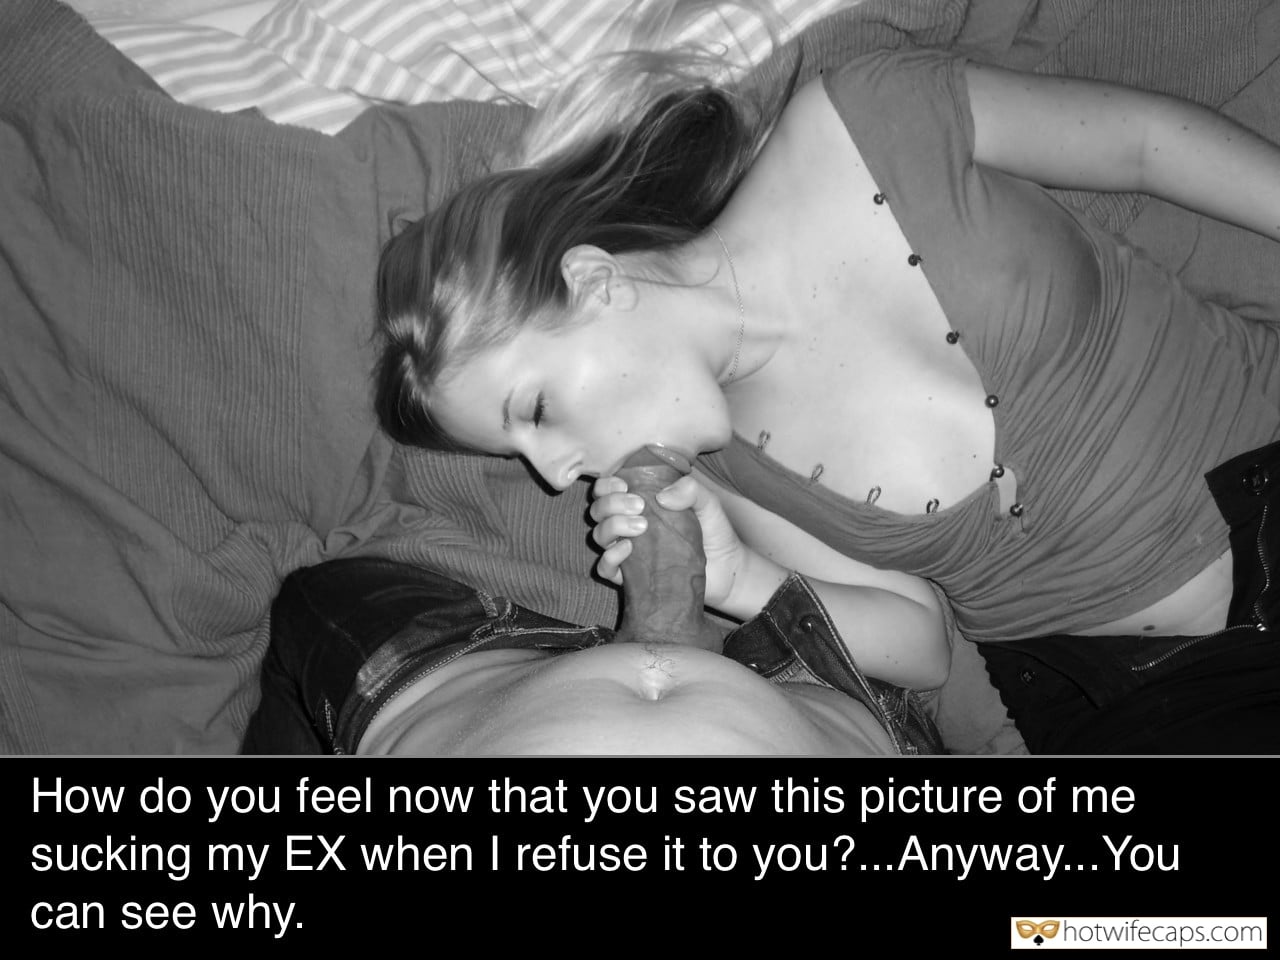 It's too big Ex Boyfriend Blowjob Bigger Cock hotwife caption: How do you feel now that you saw this picture of me sucking my EX when I refuse it to you?… Anyway… You can see why. army porn captions bigger ex sex captions Thick Cock of Her Ex in Your...